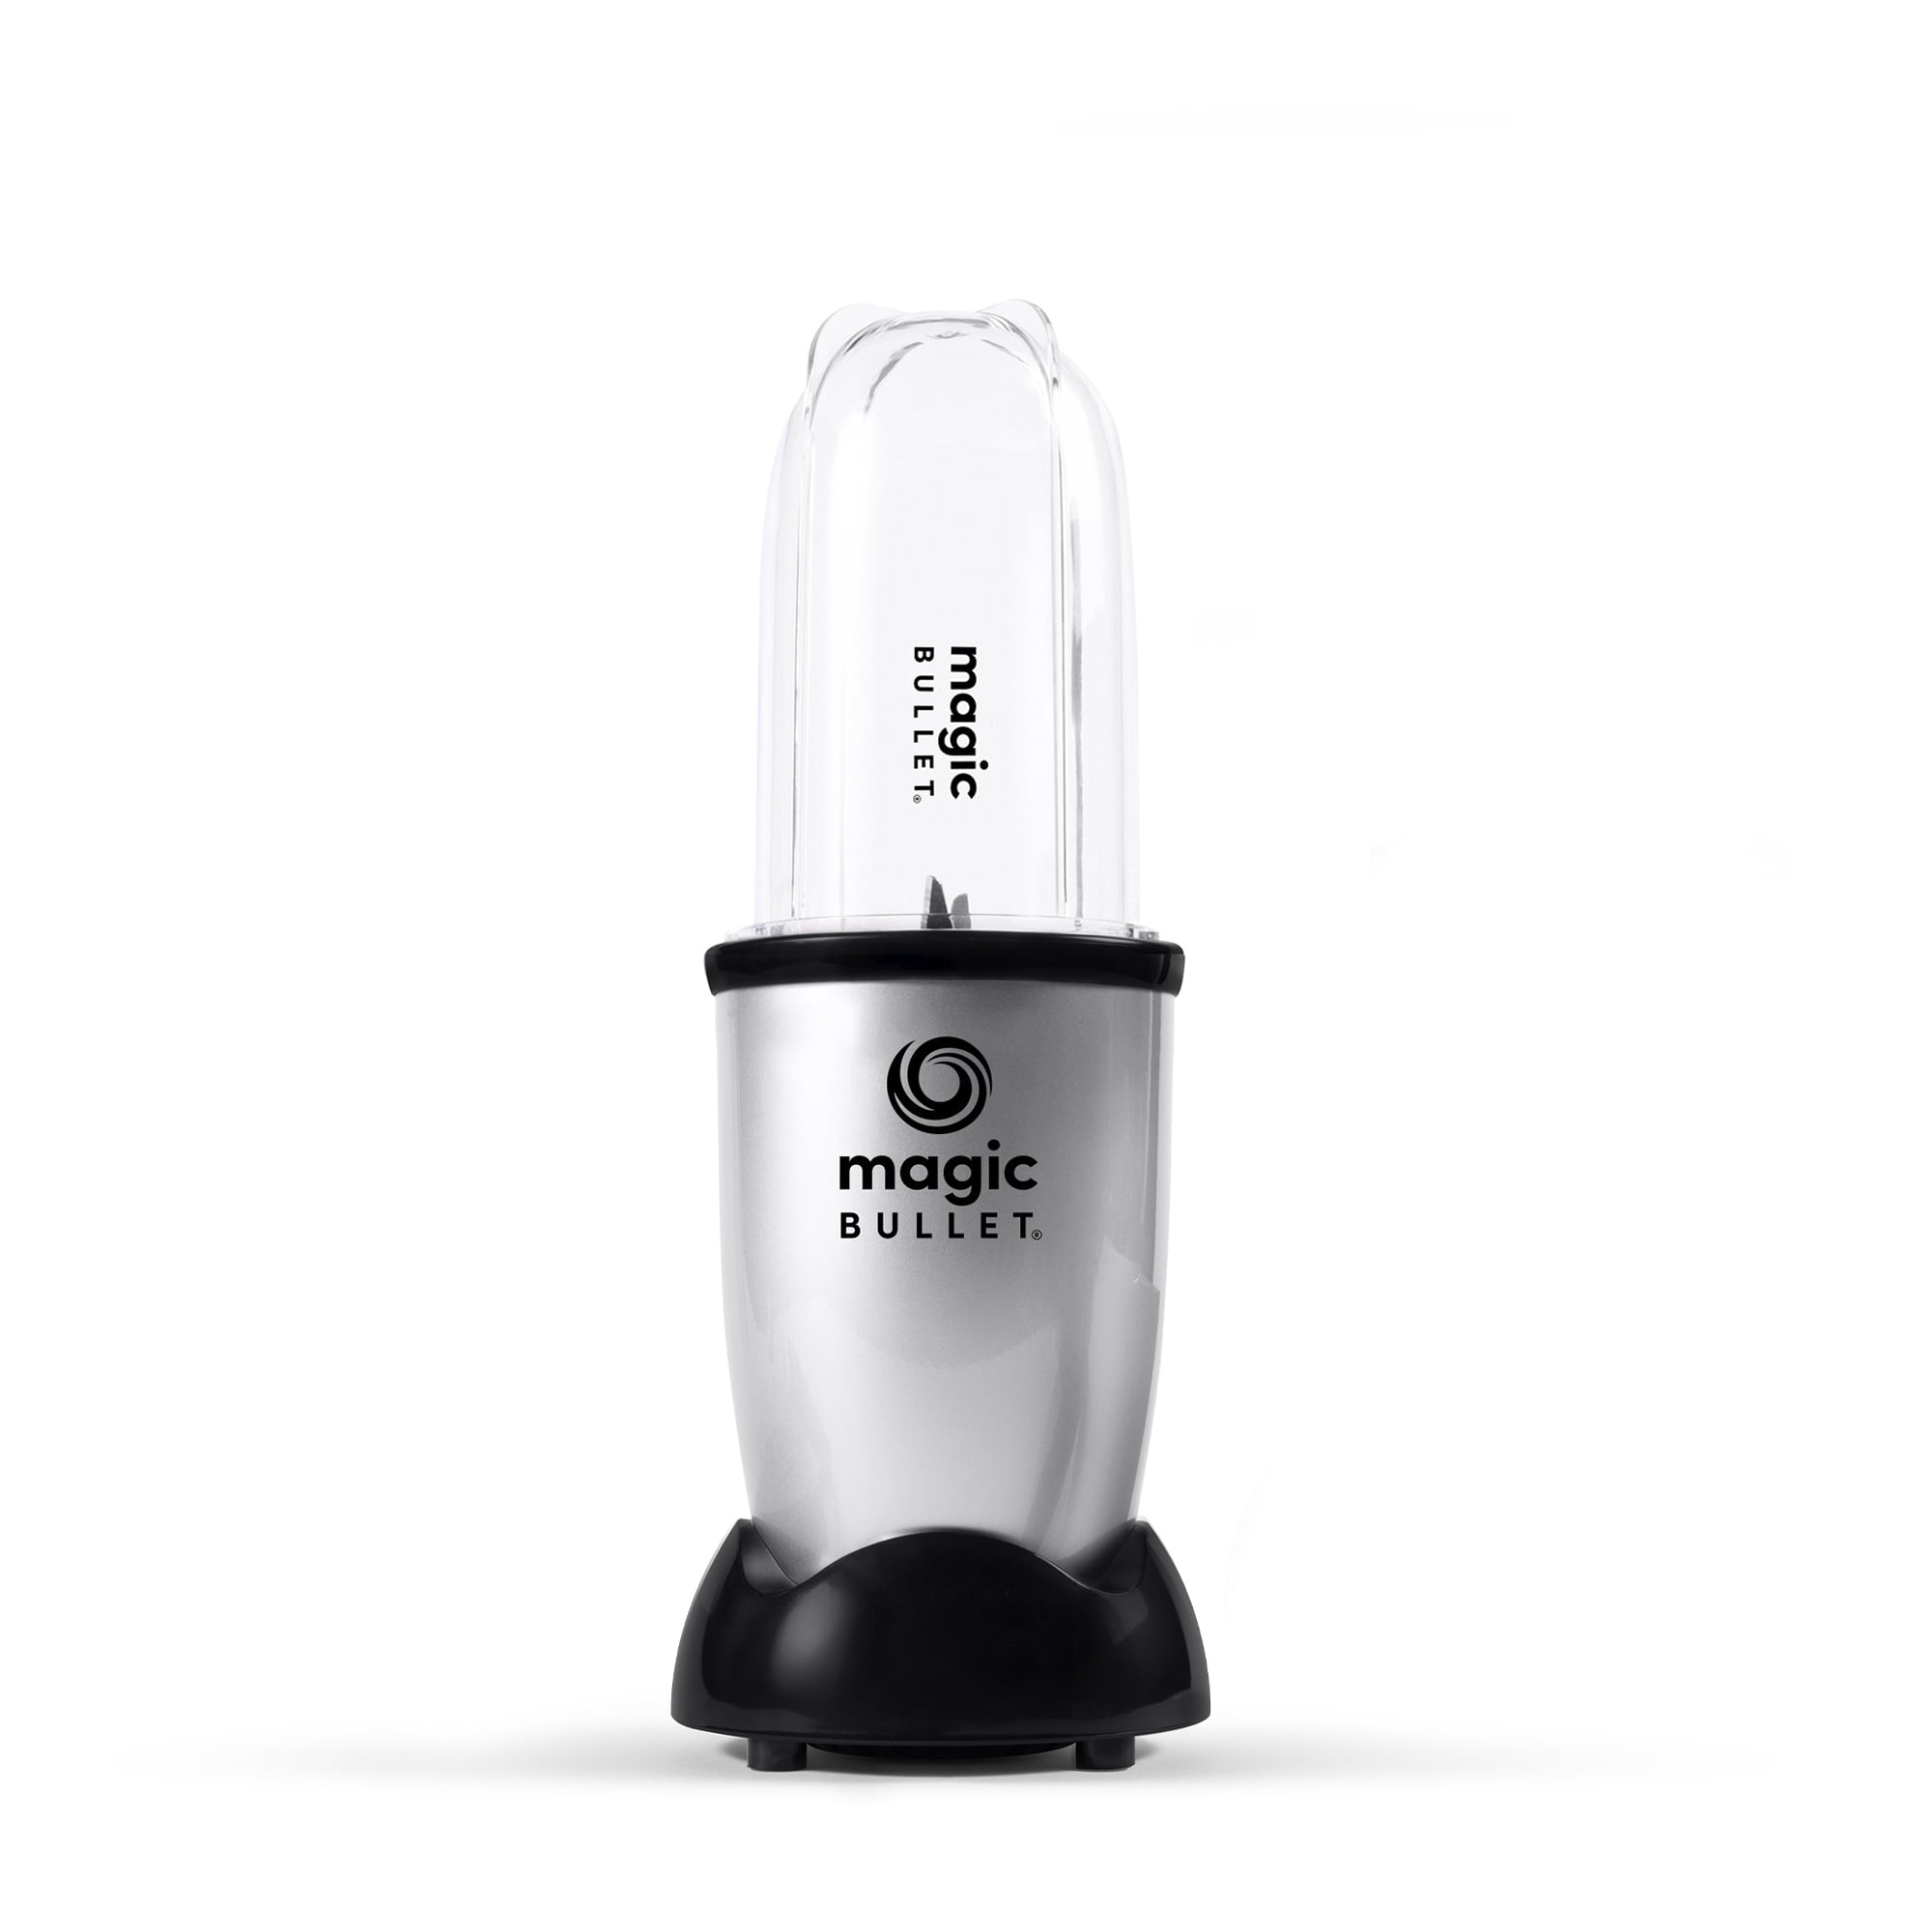 Magic Bullet Blender Small Silver: 11 Piece Set Review 